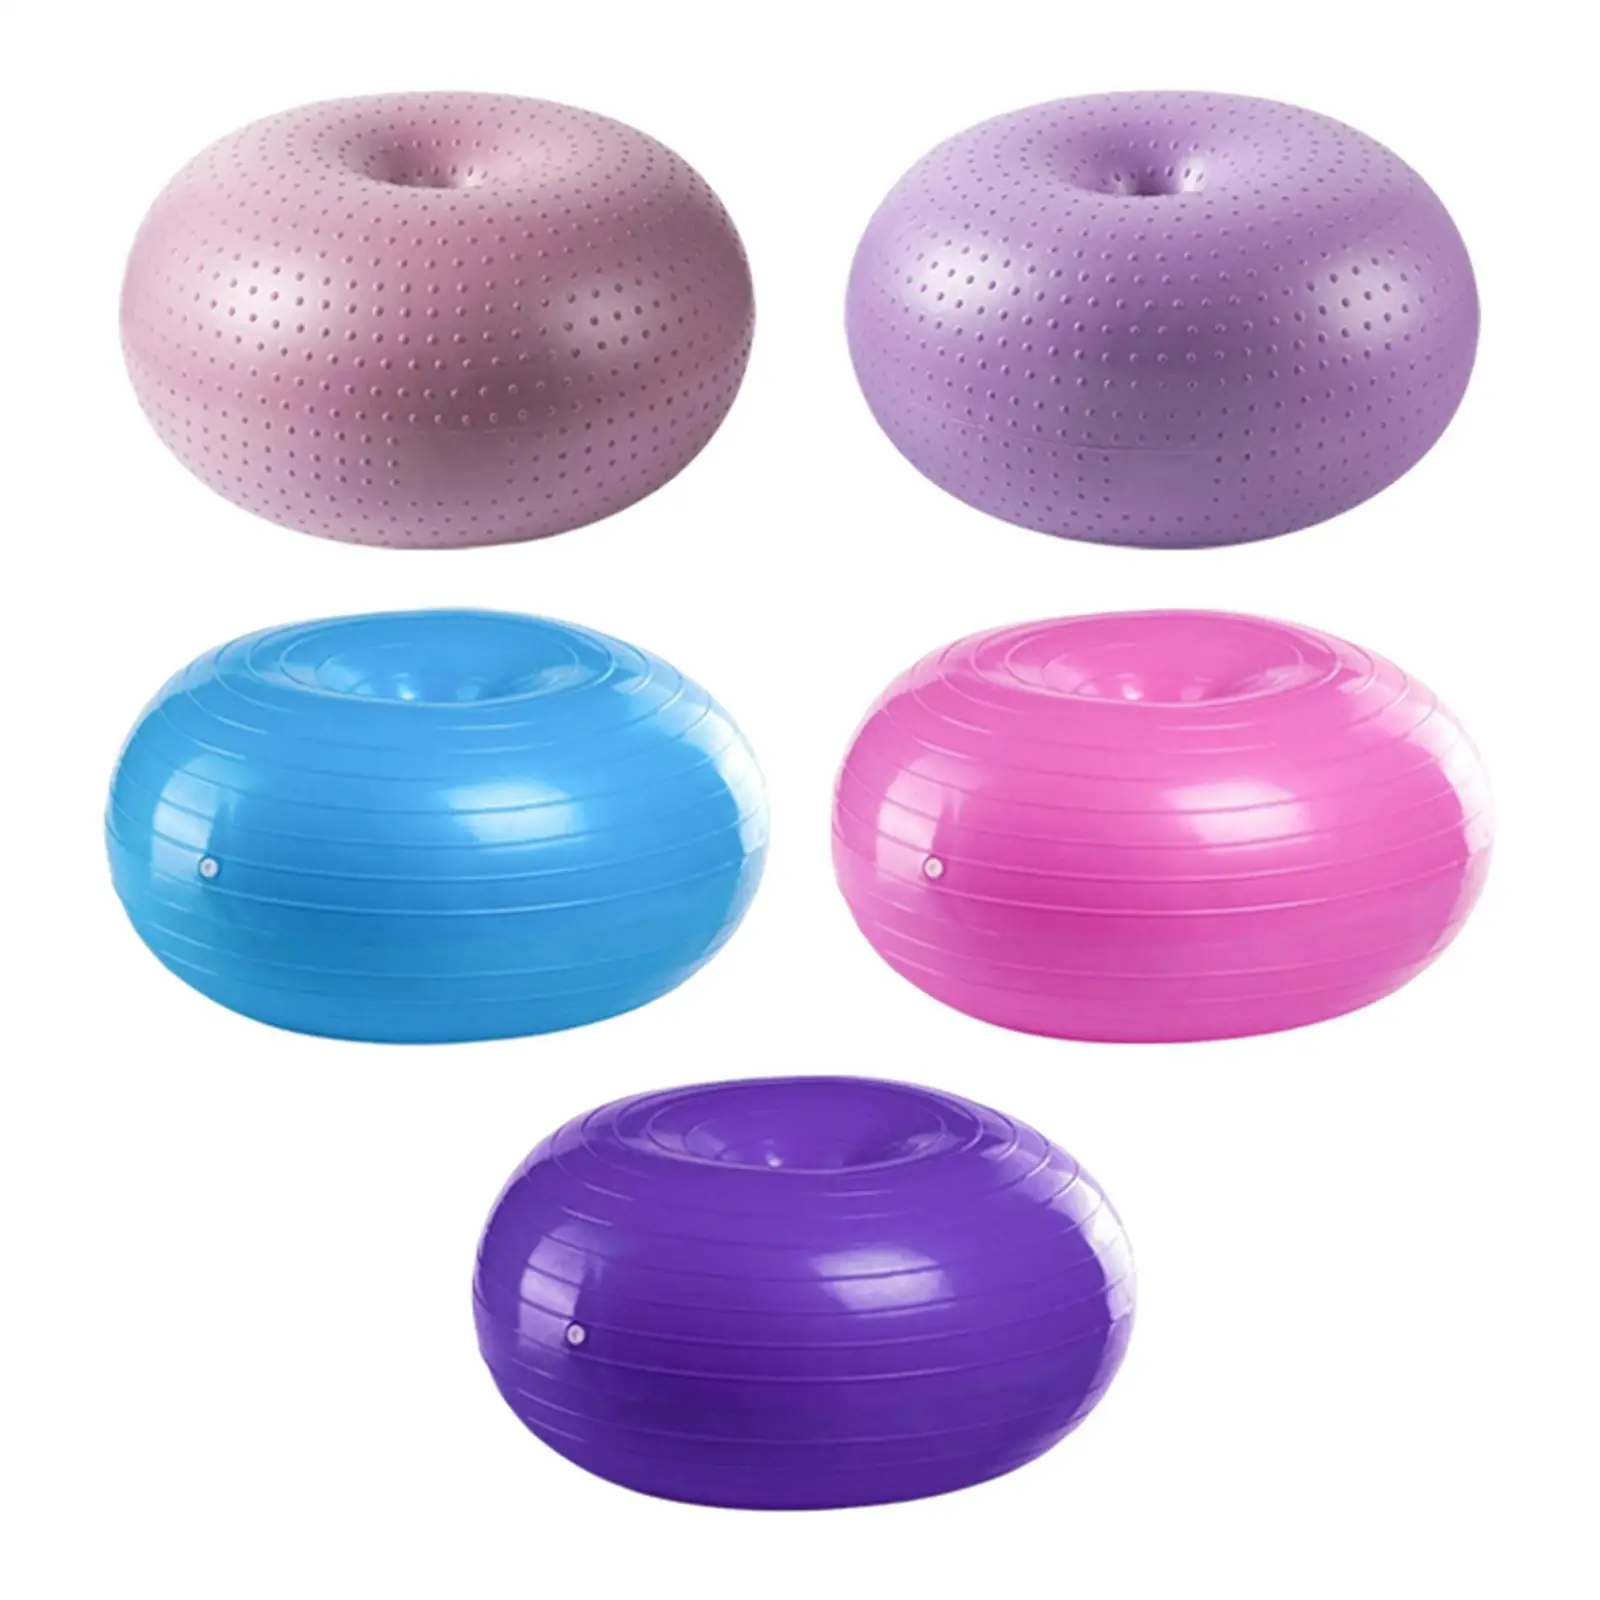 1 Piece Pilates Donut Balance Support Sport Fitness Ball Yoga Ball for Workout Gymnastic